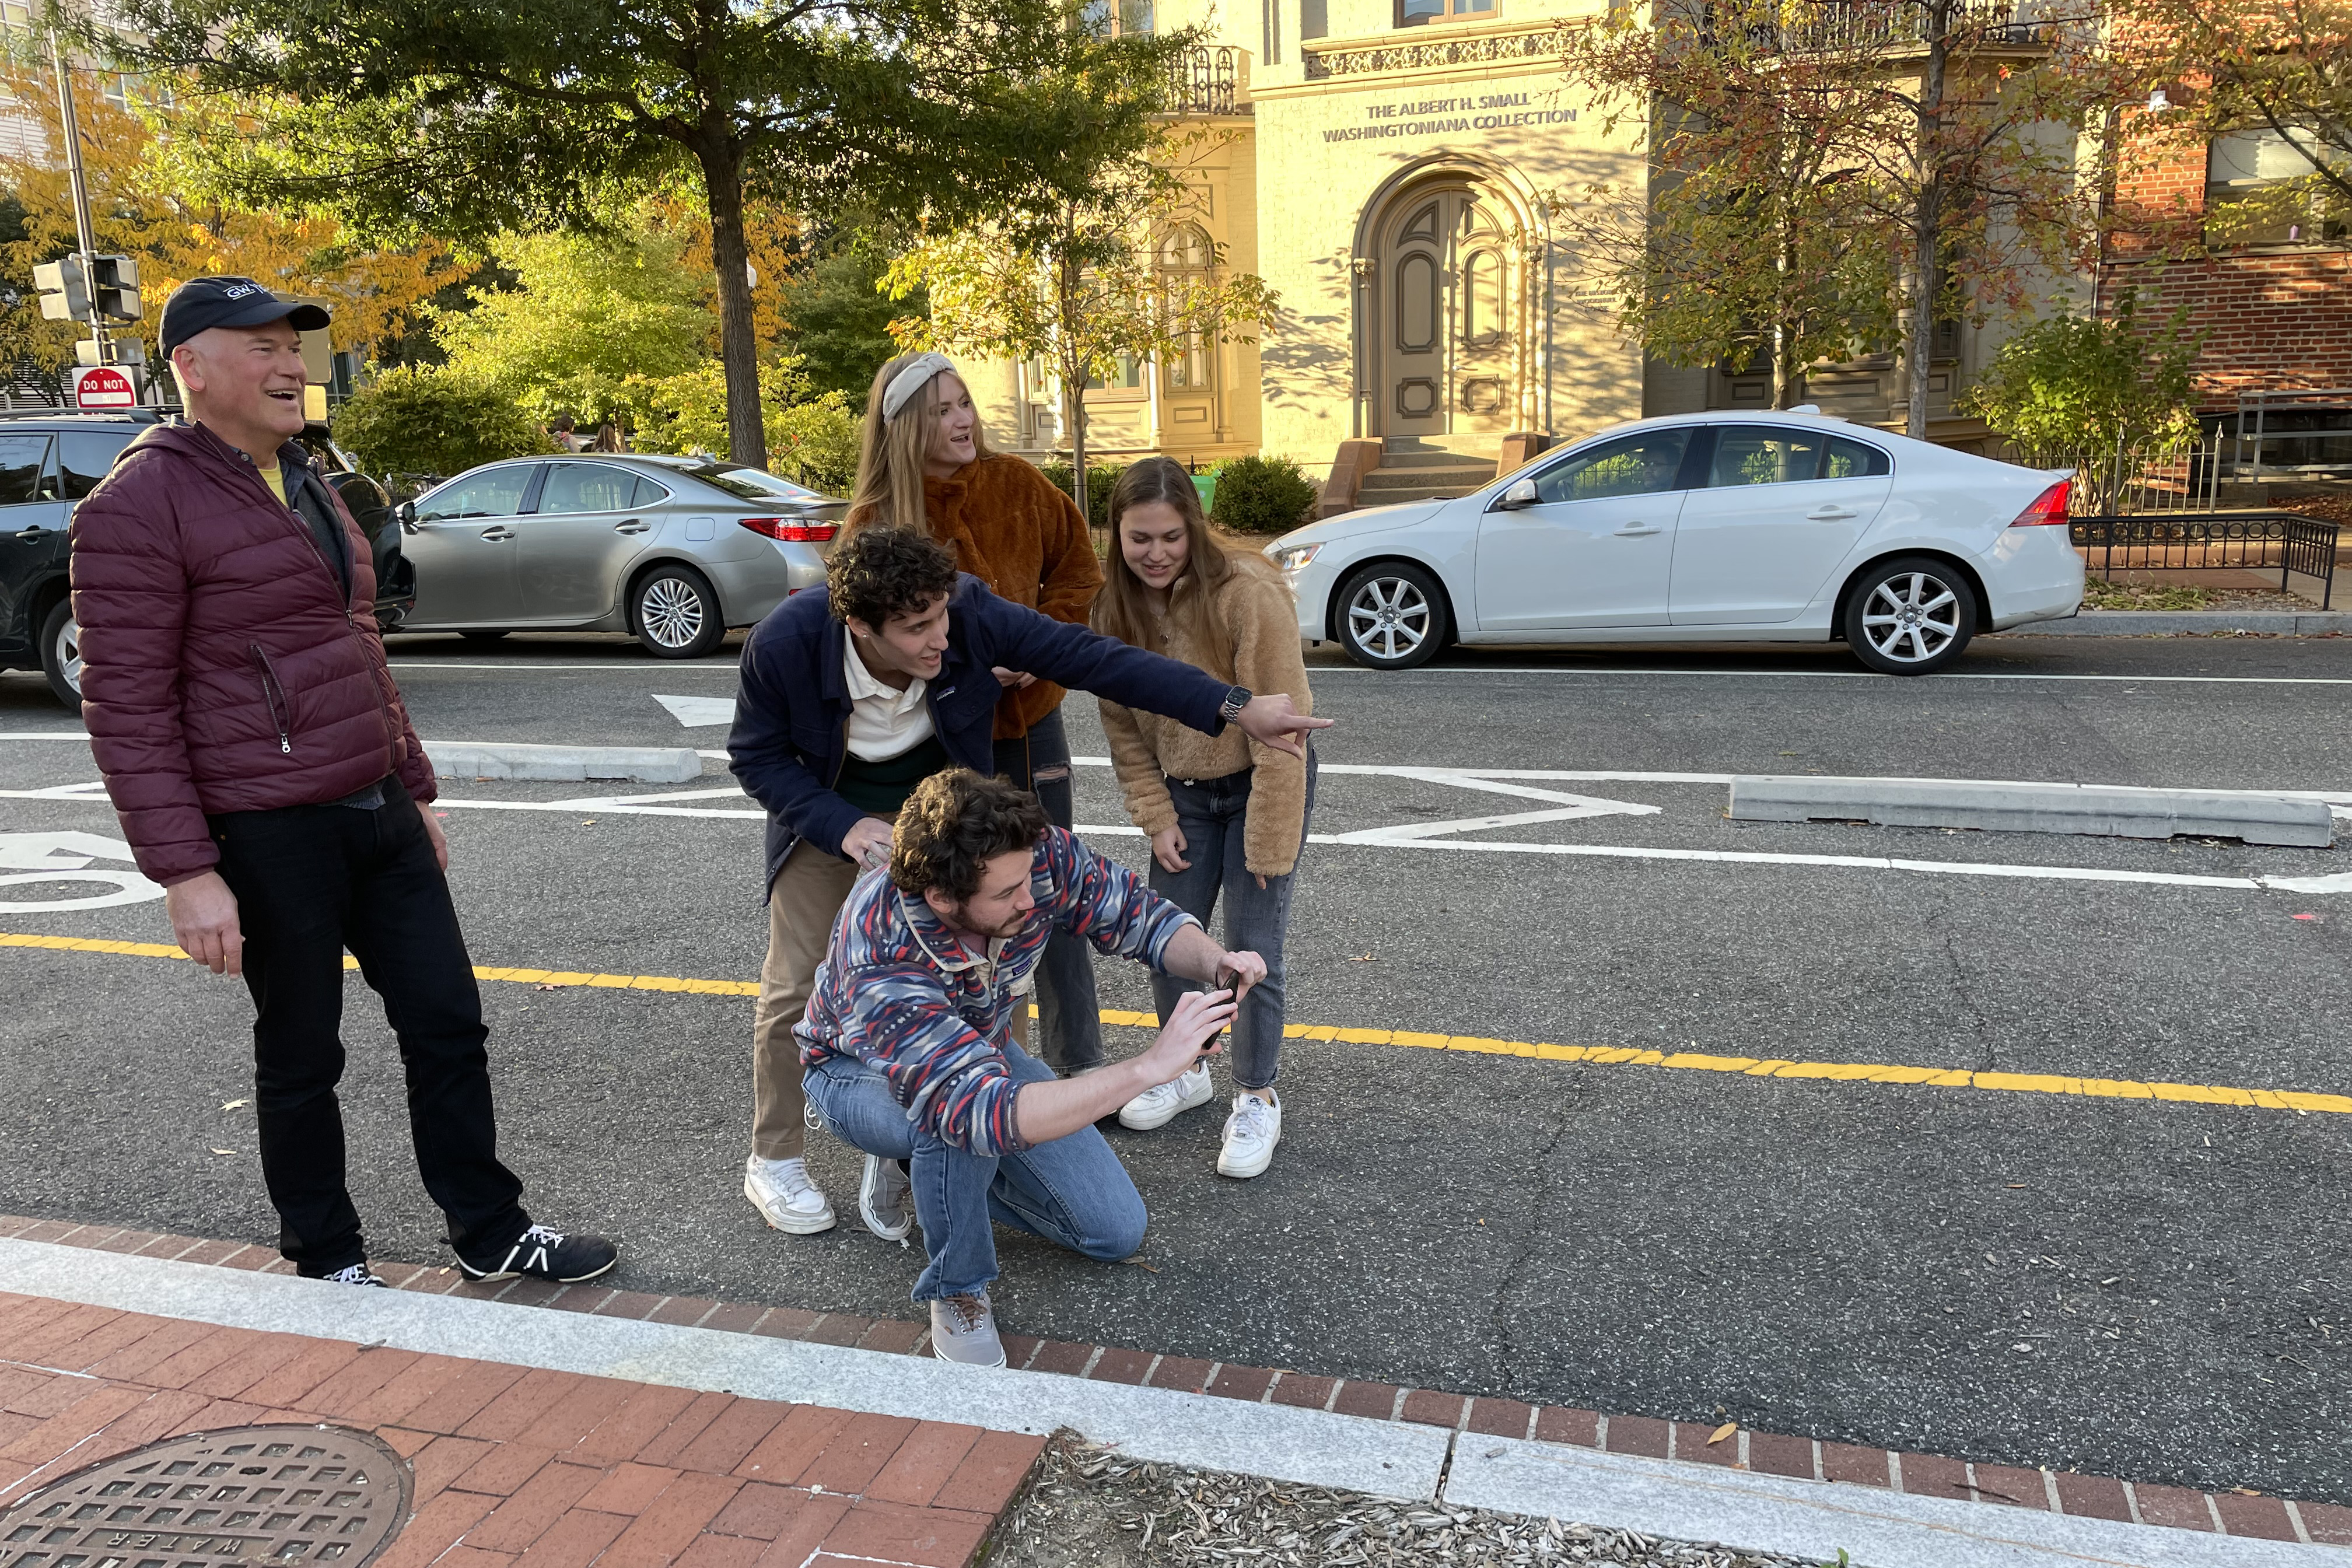 Students in a parking lot crouch around an iPhone